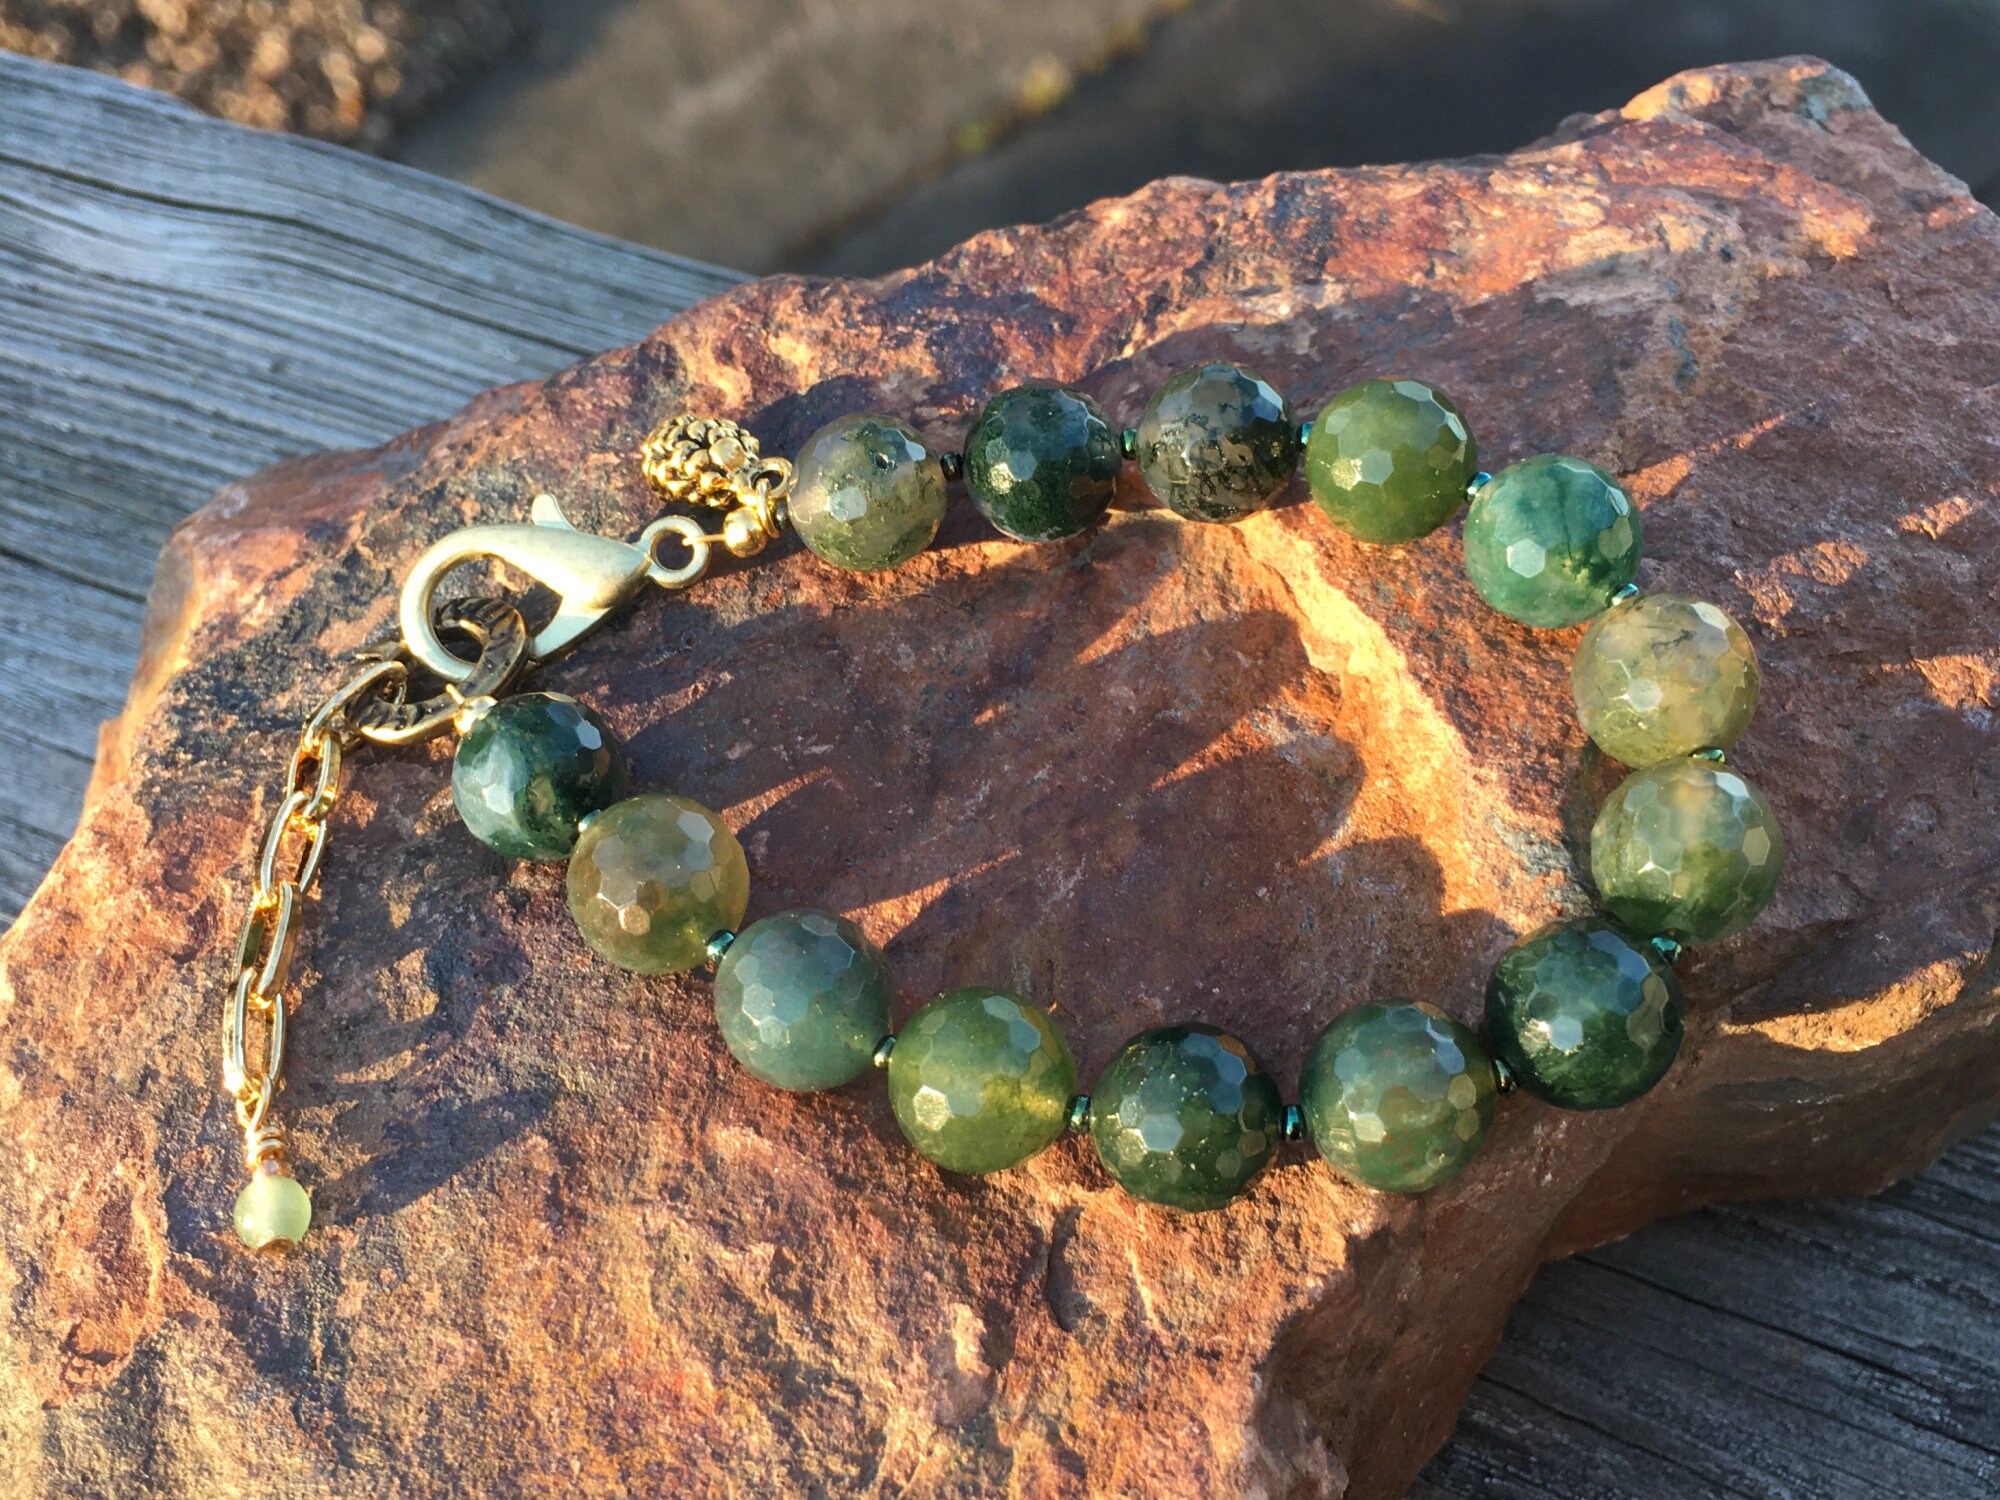 Green Stone Bracelet With Oxidized Damru Charms: Gift/Send QFilter Gifts  Online J11141551 |IGP.com